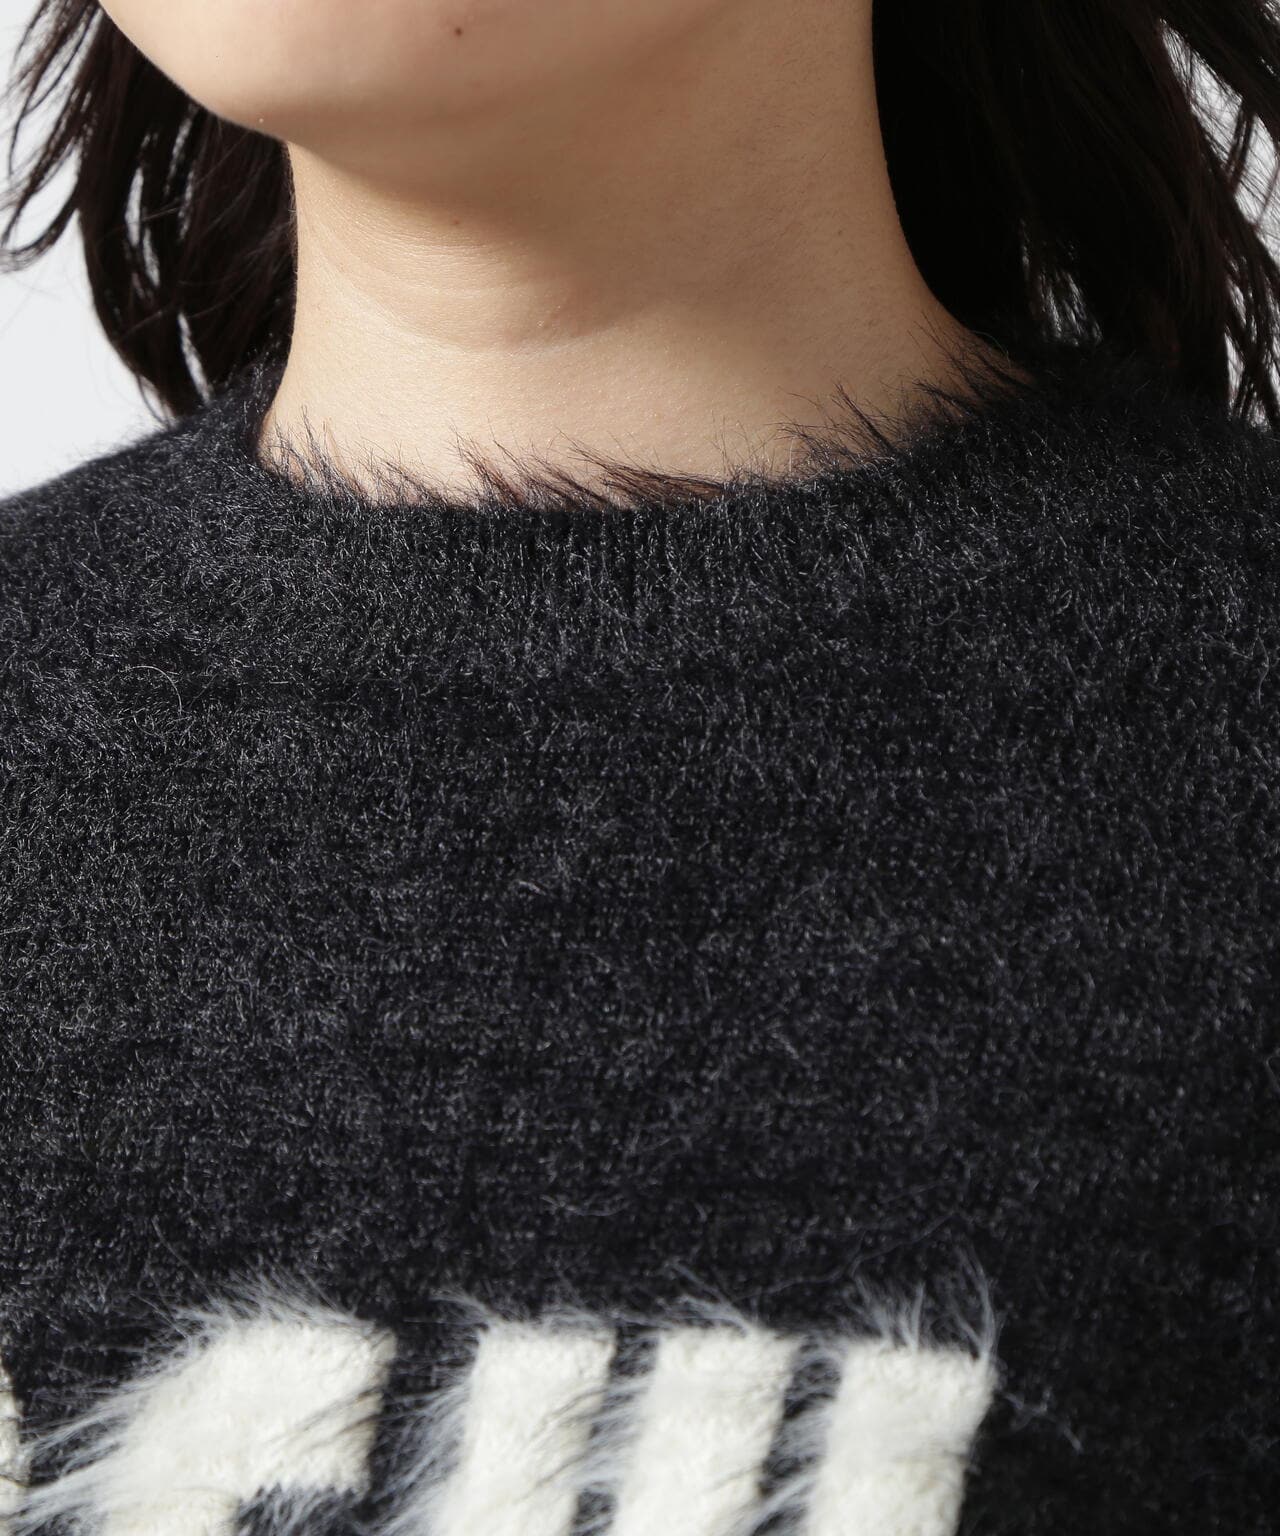 MAISON SPECIAL/メゾンスペシャル/Shaggy Yarn Logo Knit Pullover